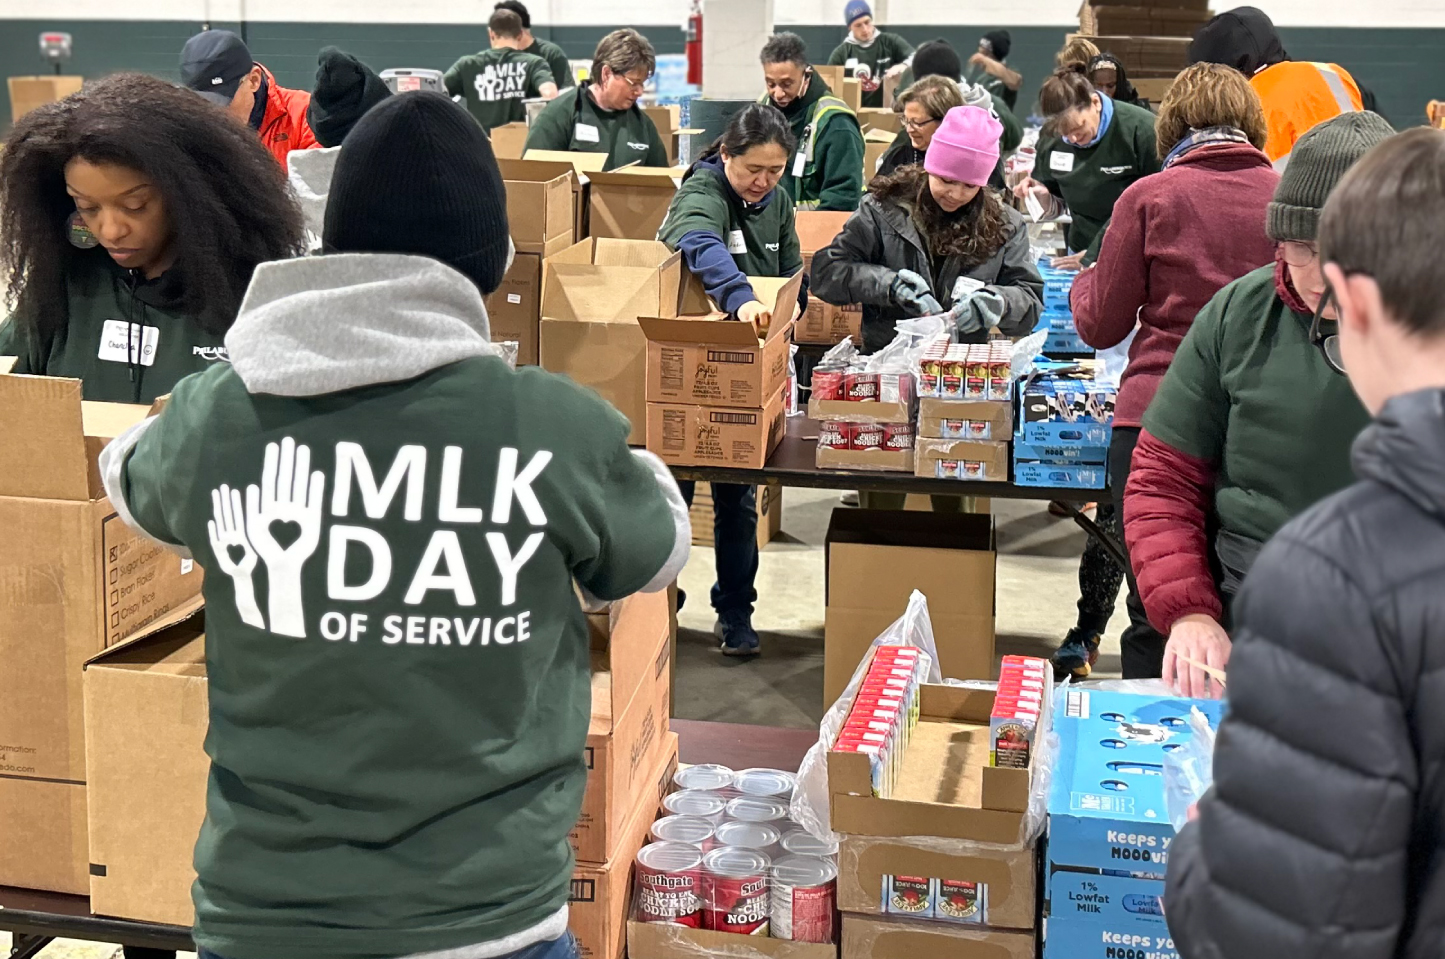 Dr. Martin Luther King Jr. Day of Service